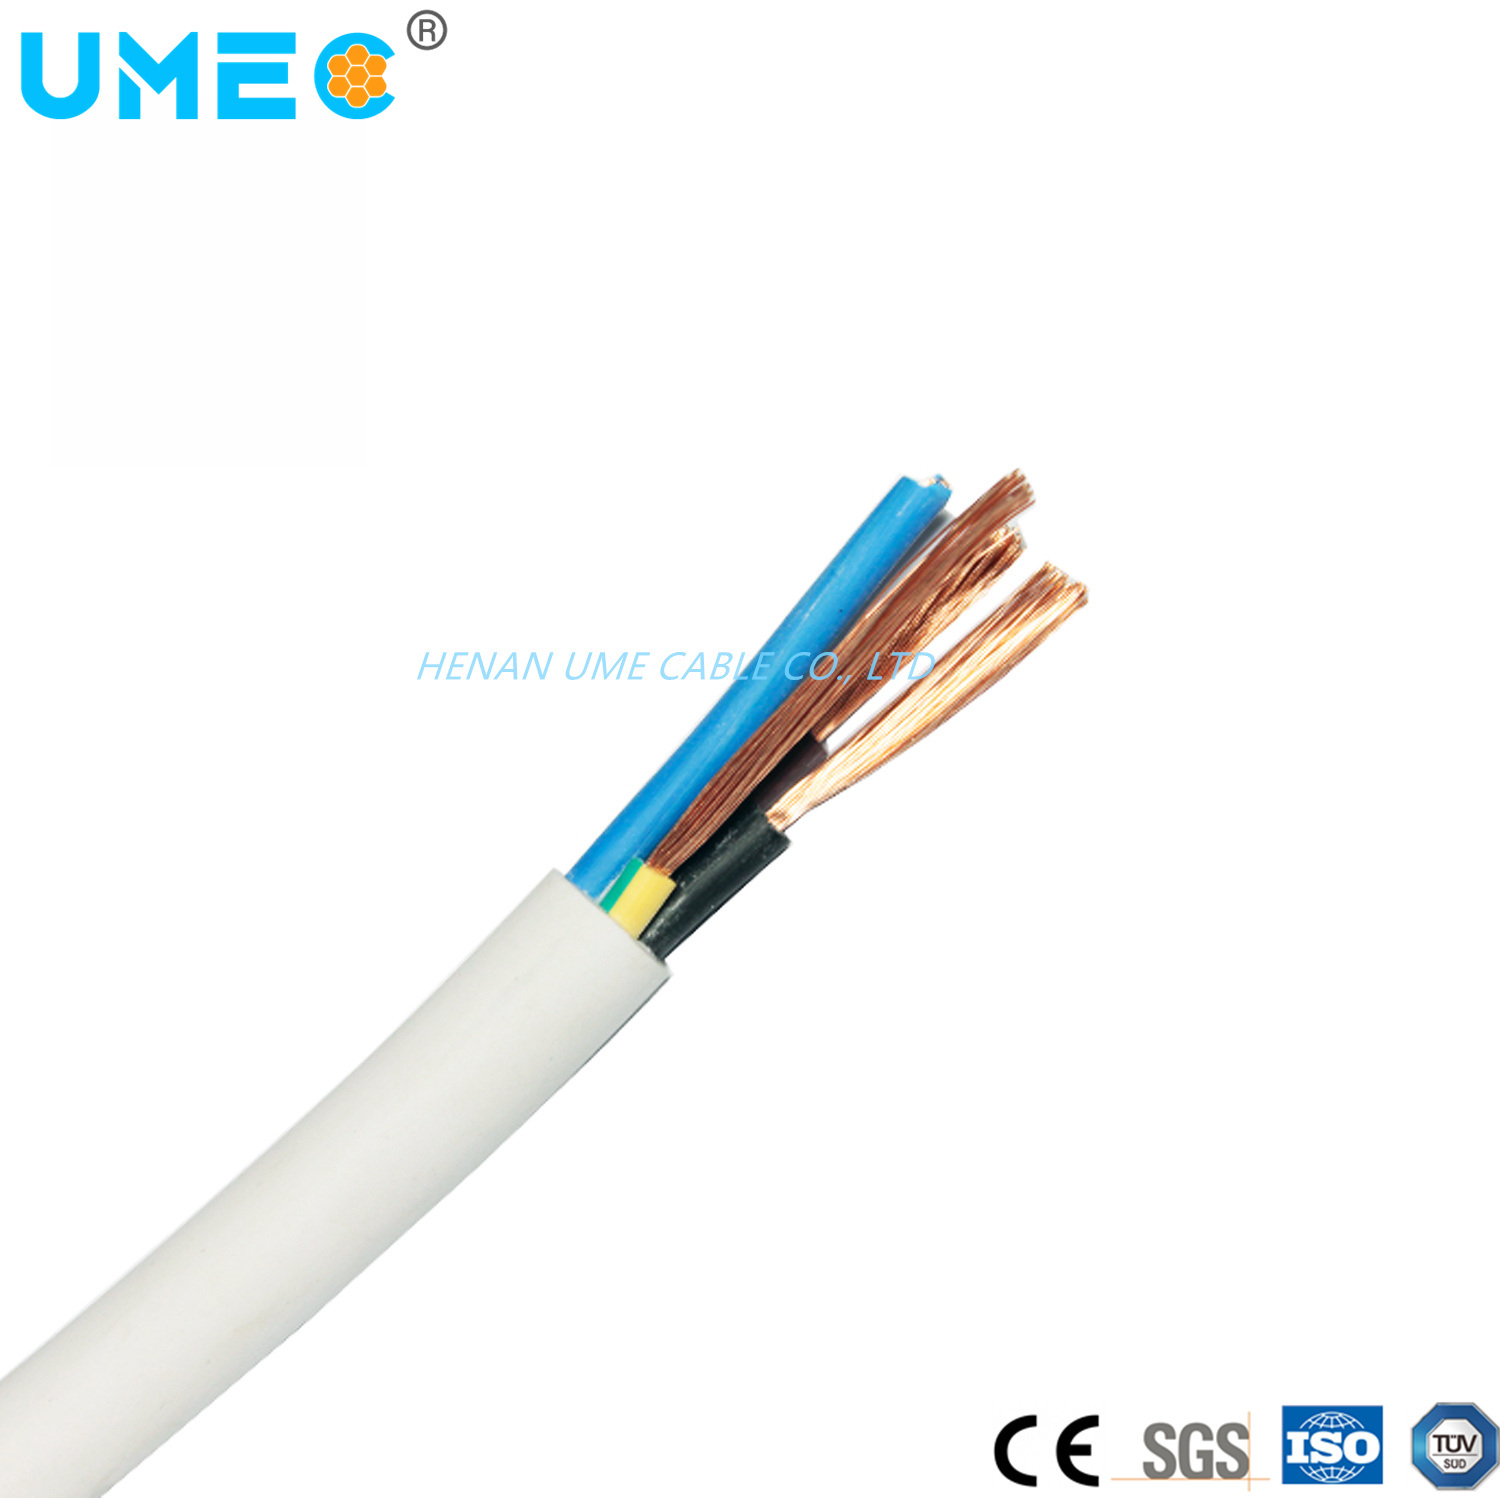 Wholesale Power and Control Cable 18 20AWG Oelflex Classic 110 Series Flexible Conductor Electrical Control Cable